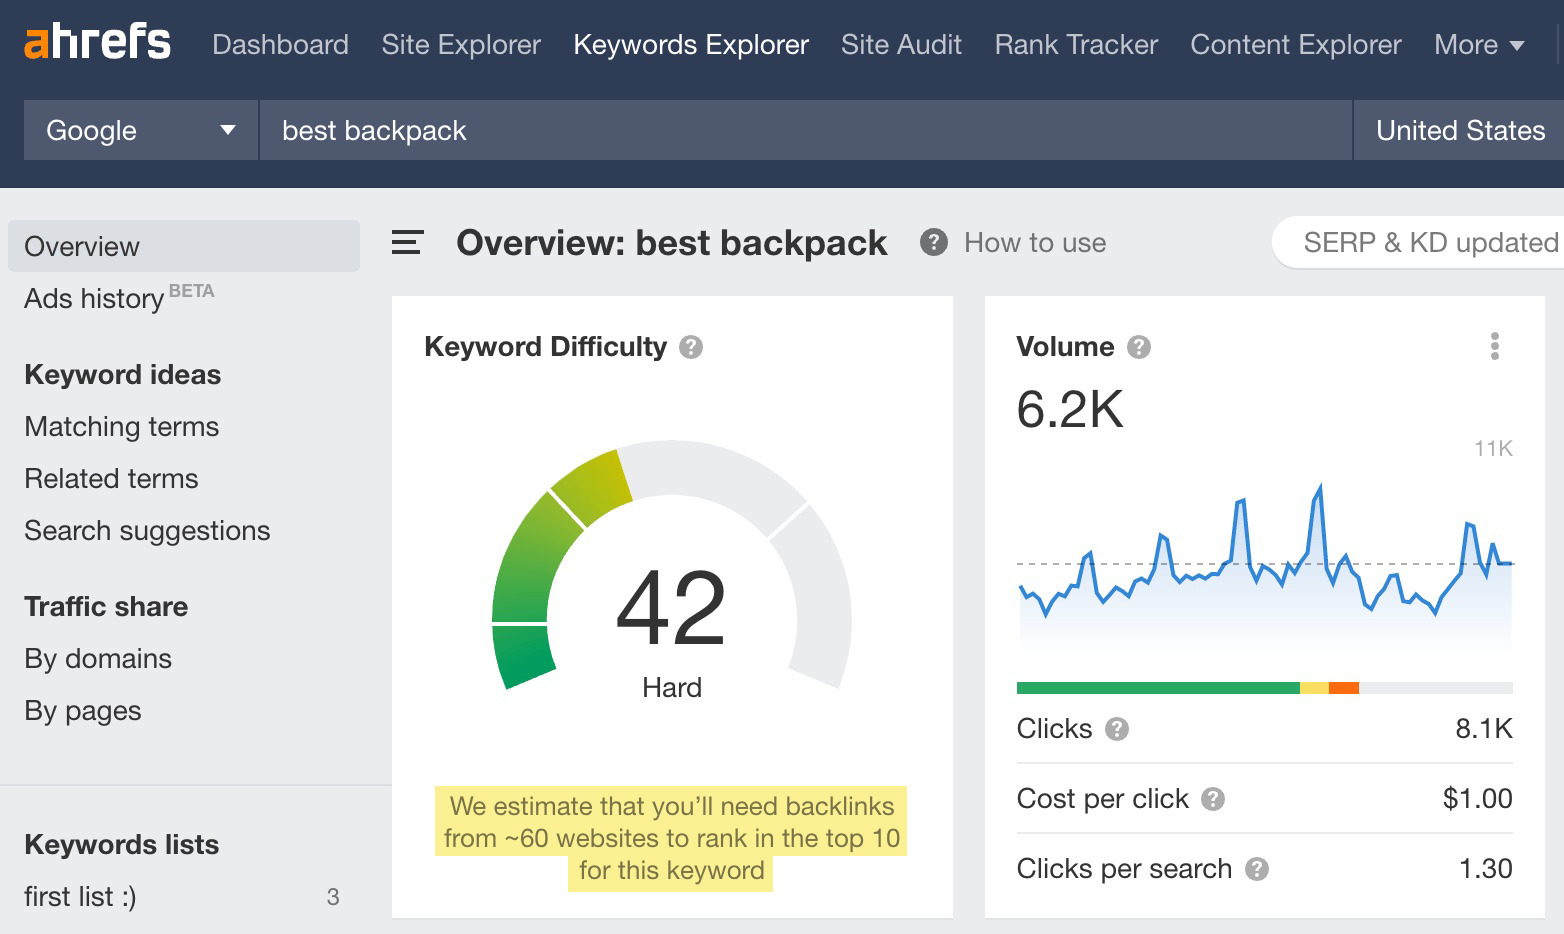 Keywords Explorer overview of "best backpack"; notably, there's a text hint below the KD score